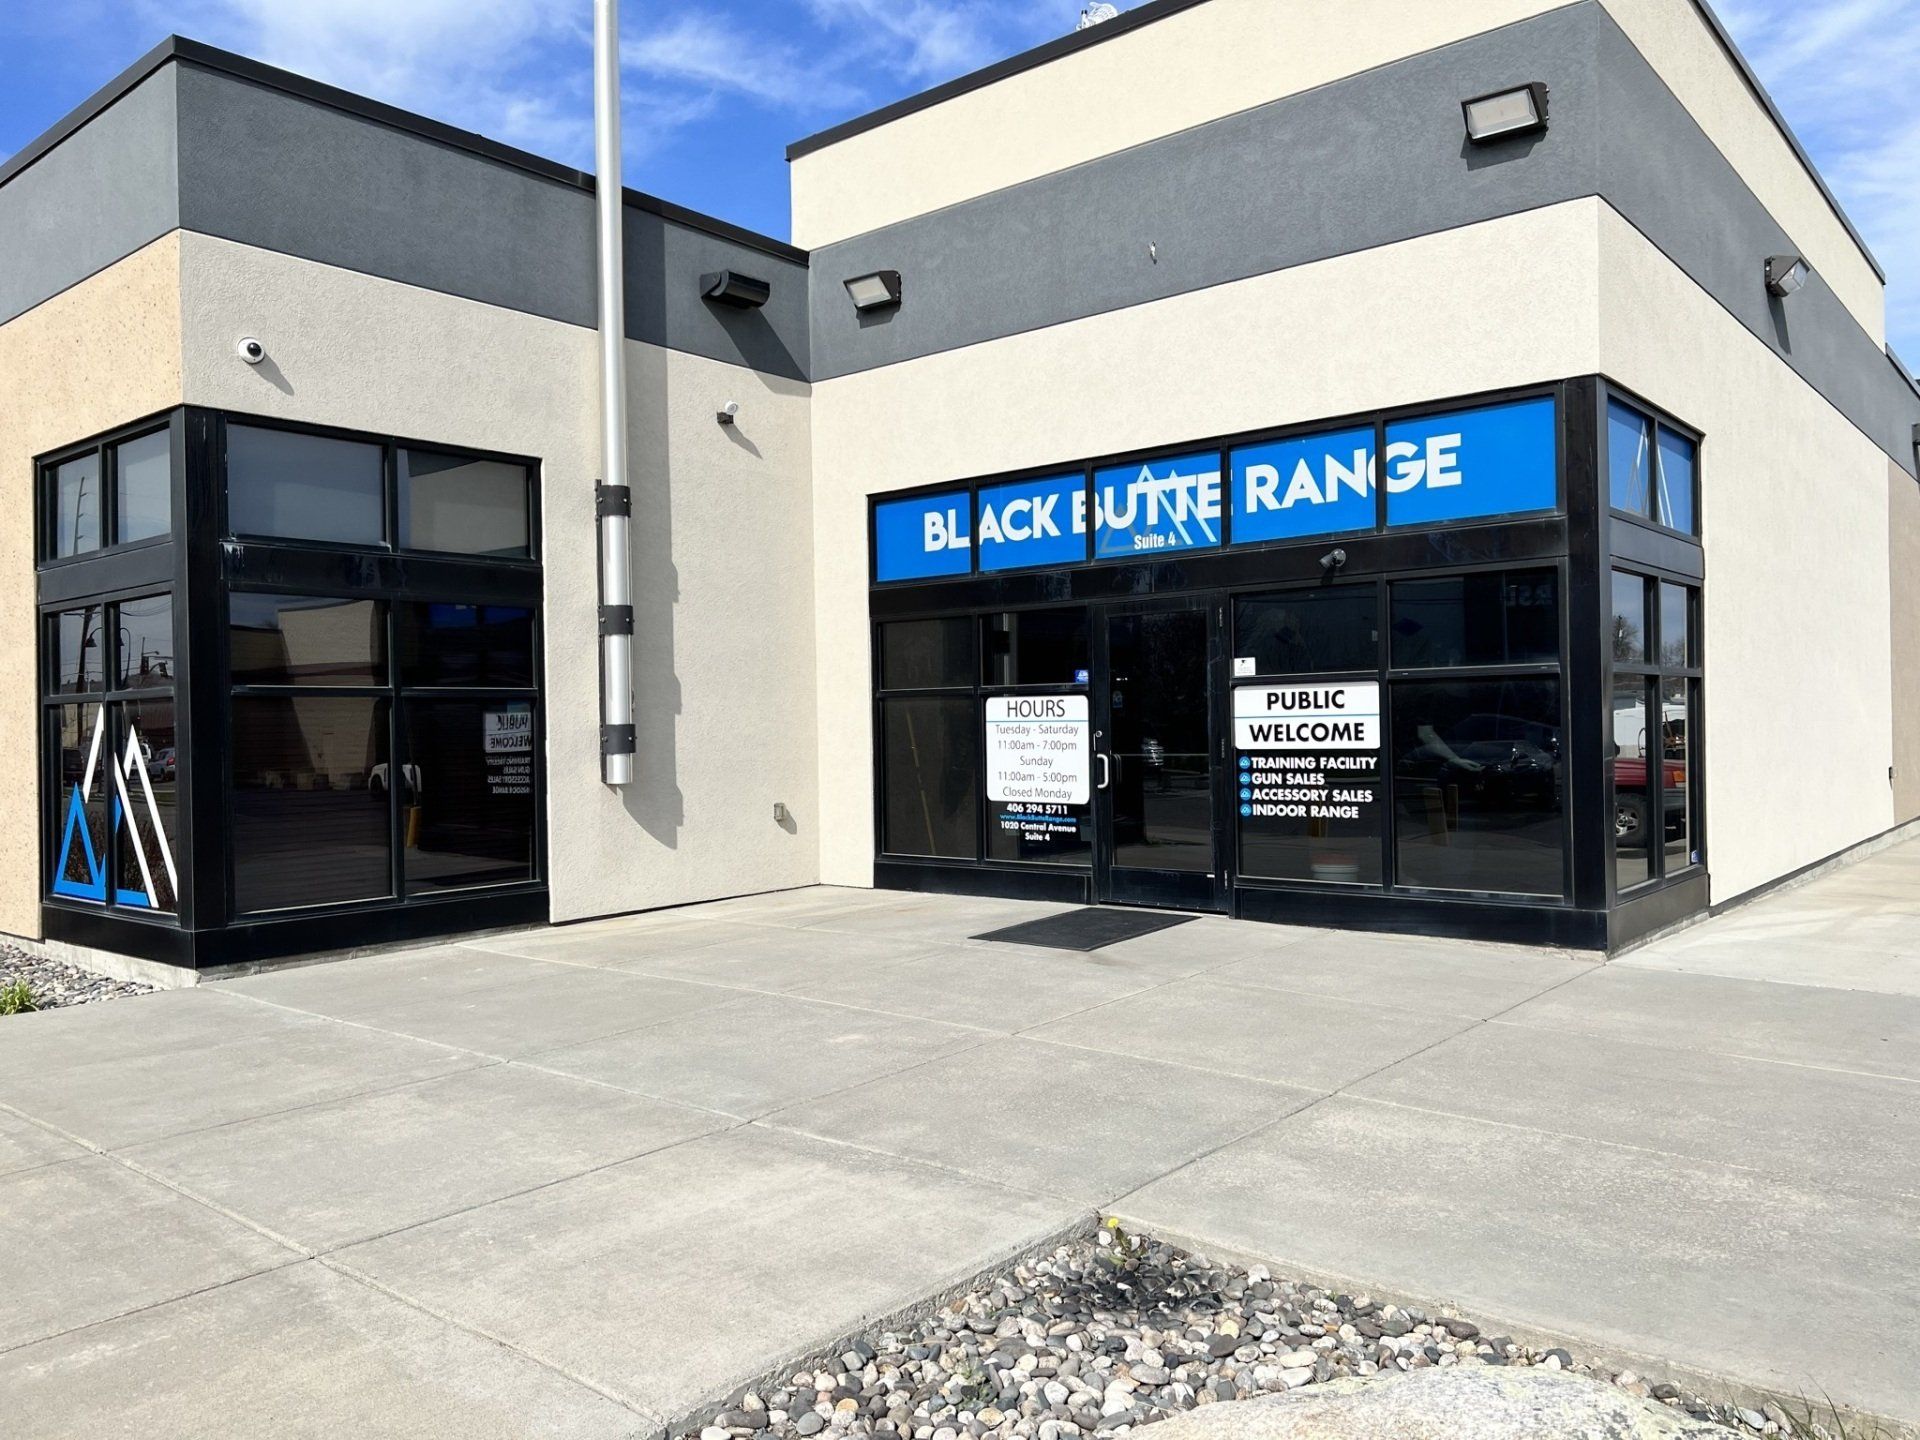 Tinted Windows Of A Commercial Establishment | Billings, MT | Tint Guy